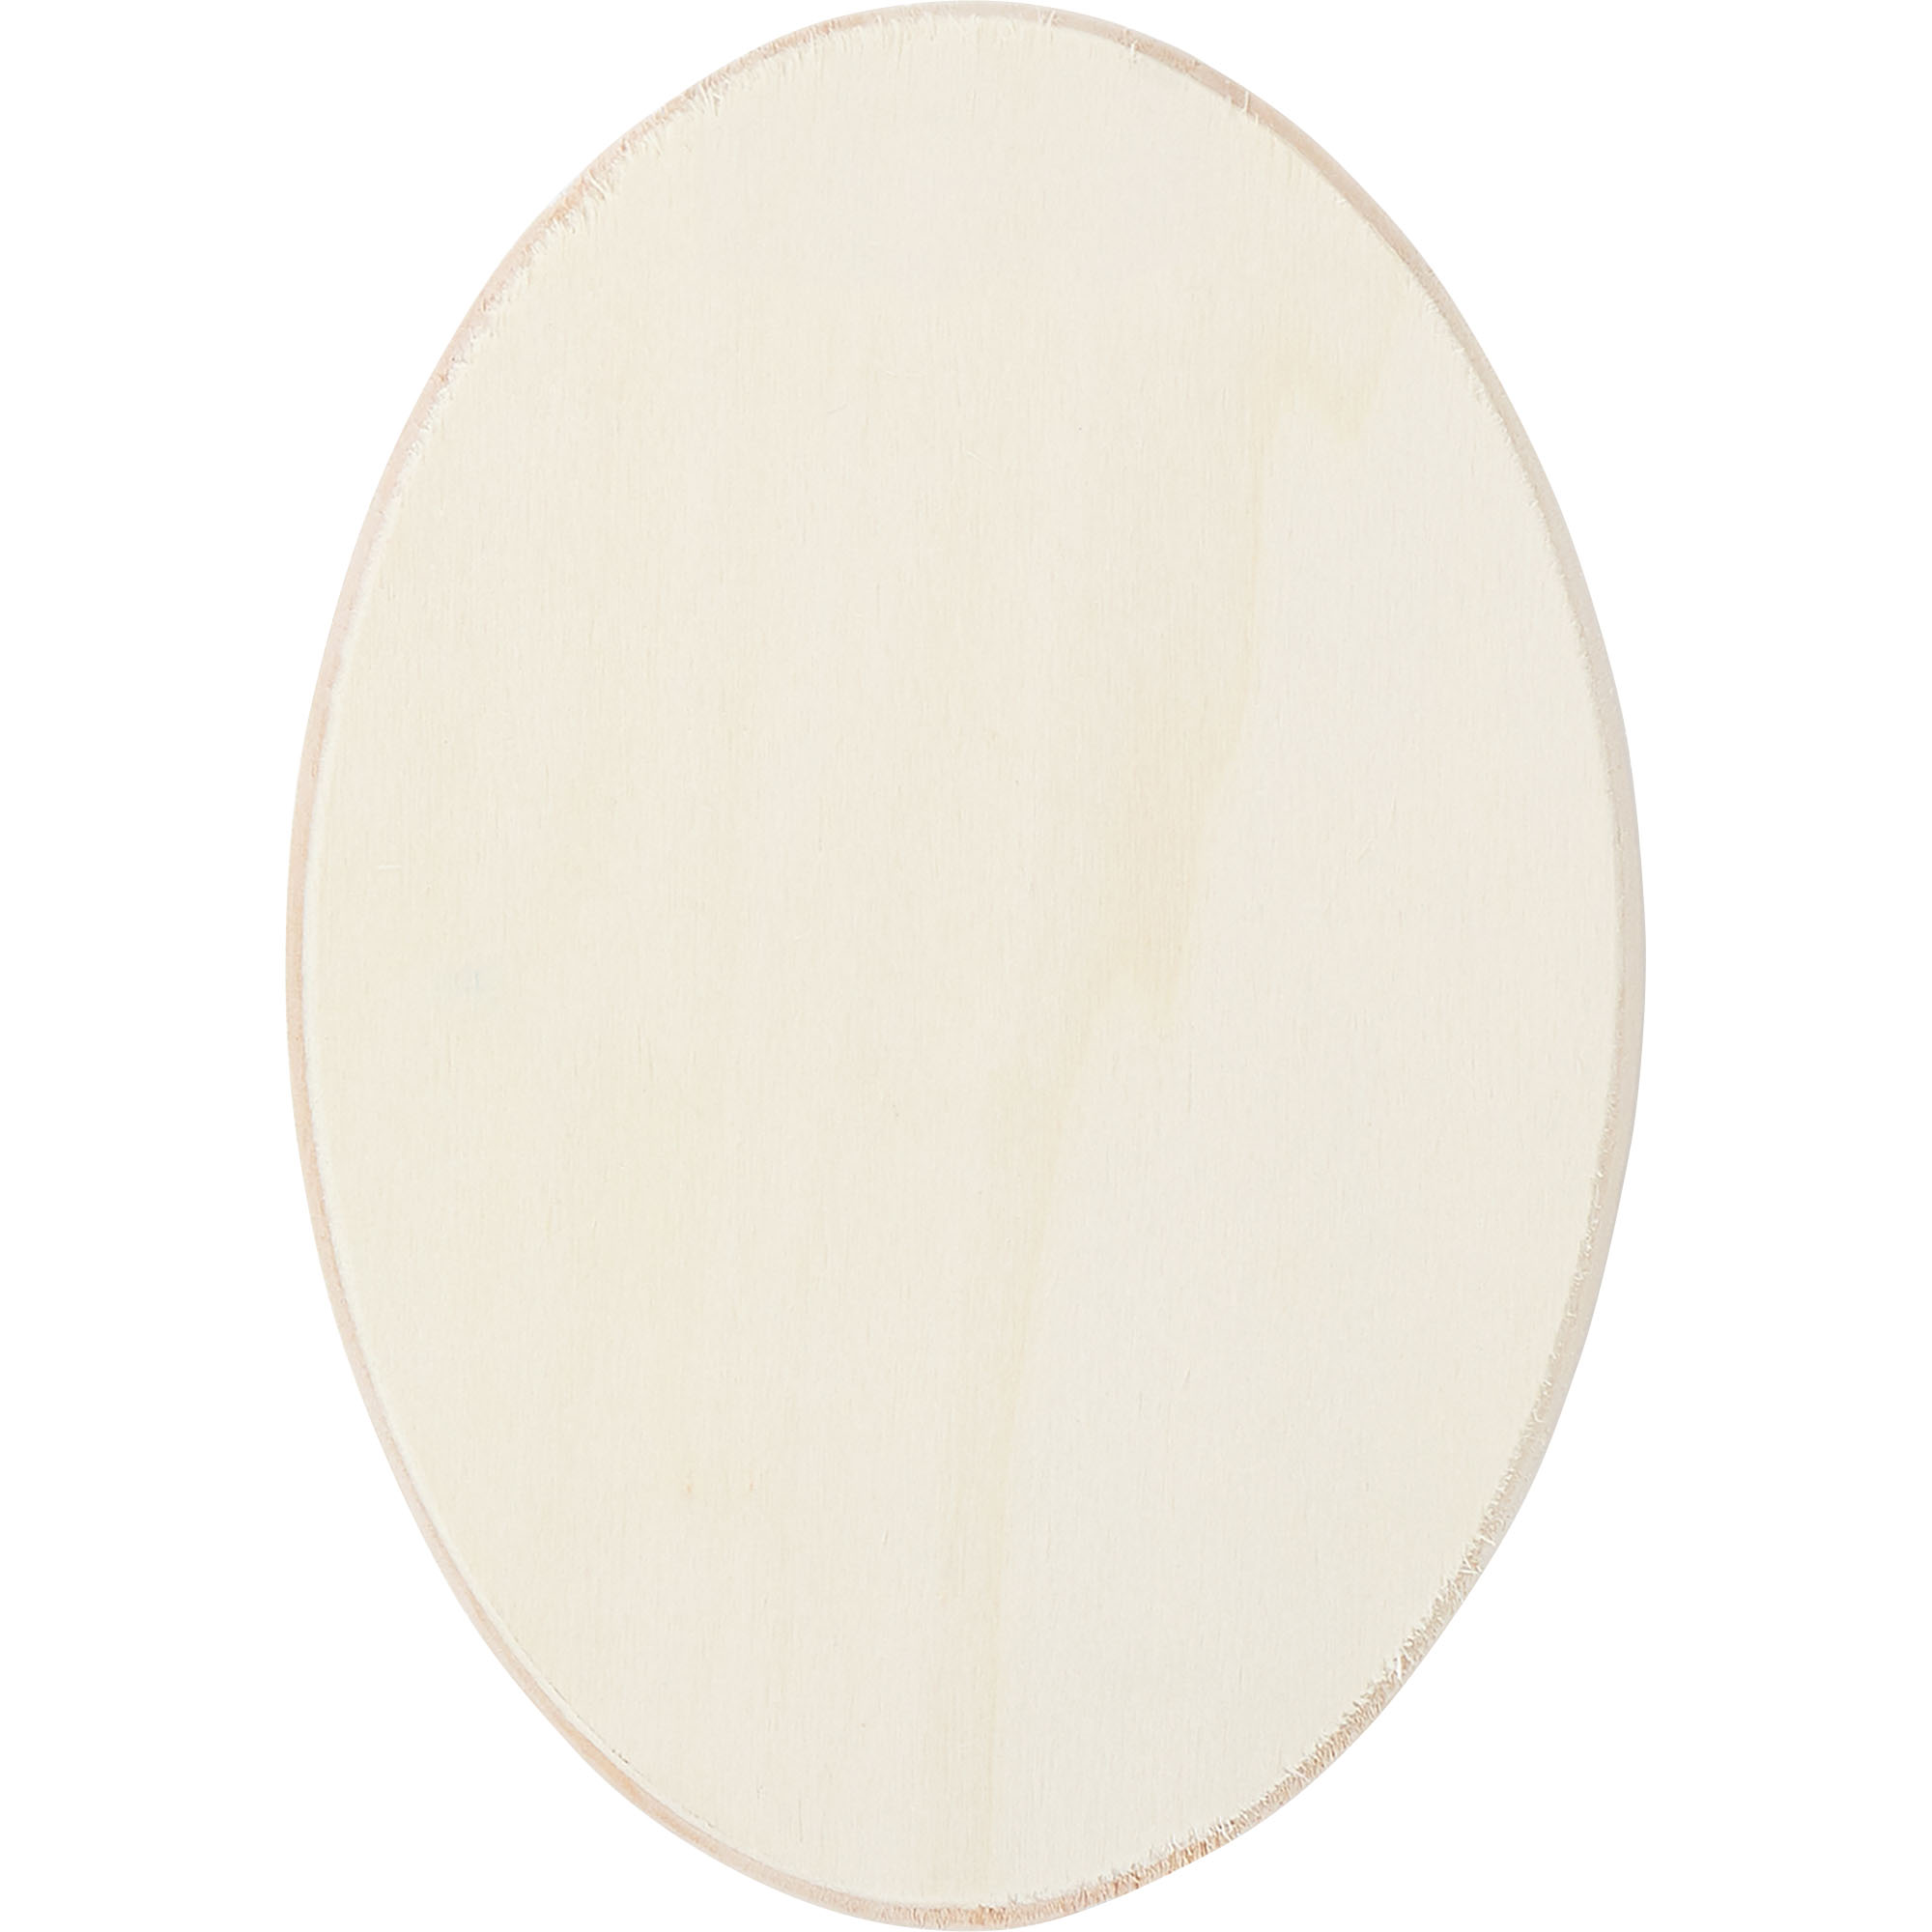 Plaid Unpainted Wood Surface, Oval Plaque, 1 Piece, 5" x 7" - image 2 of 5